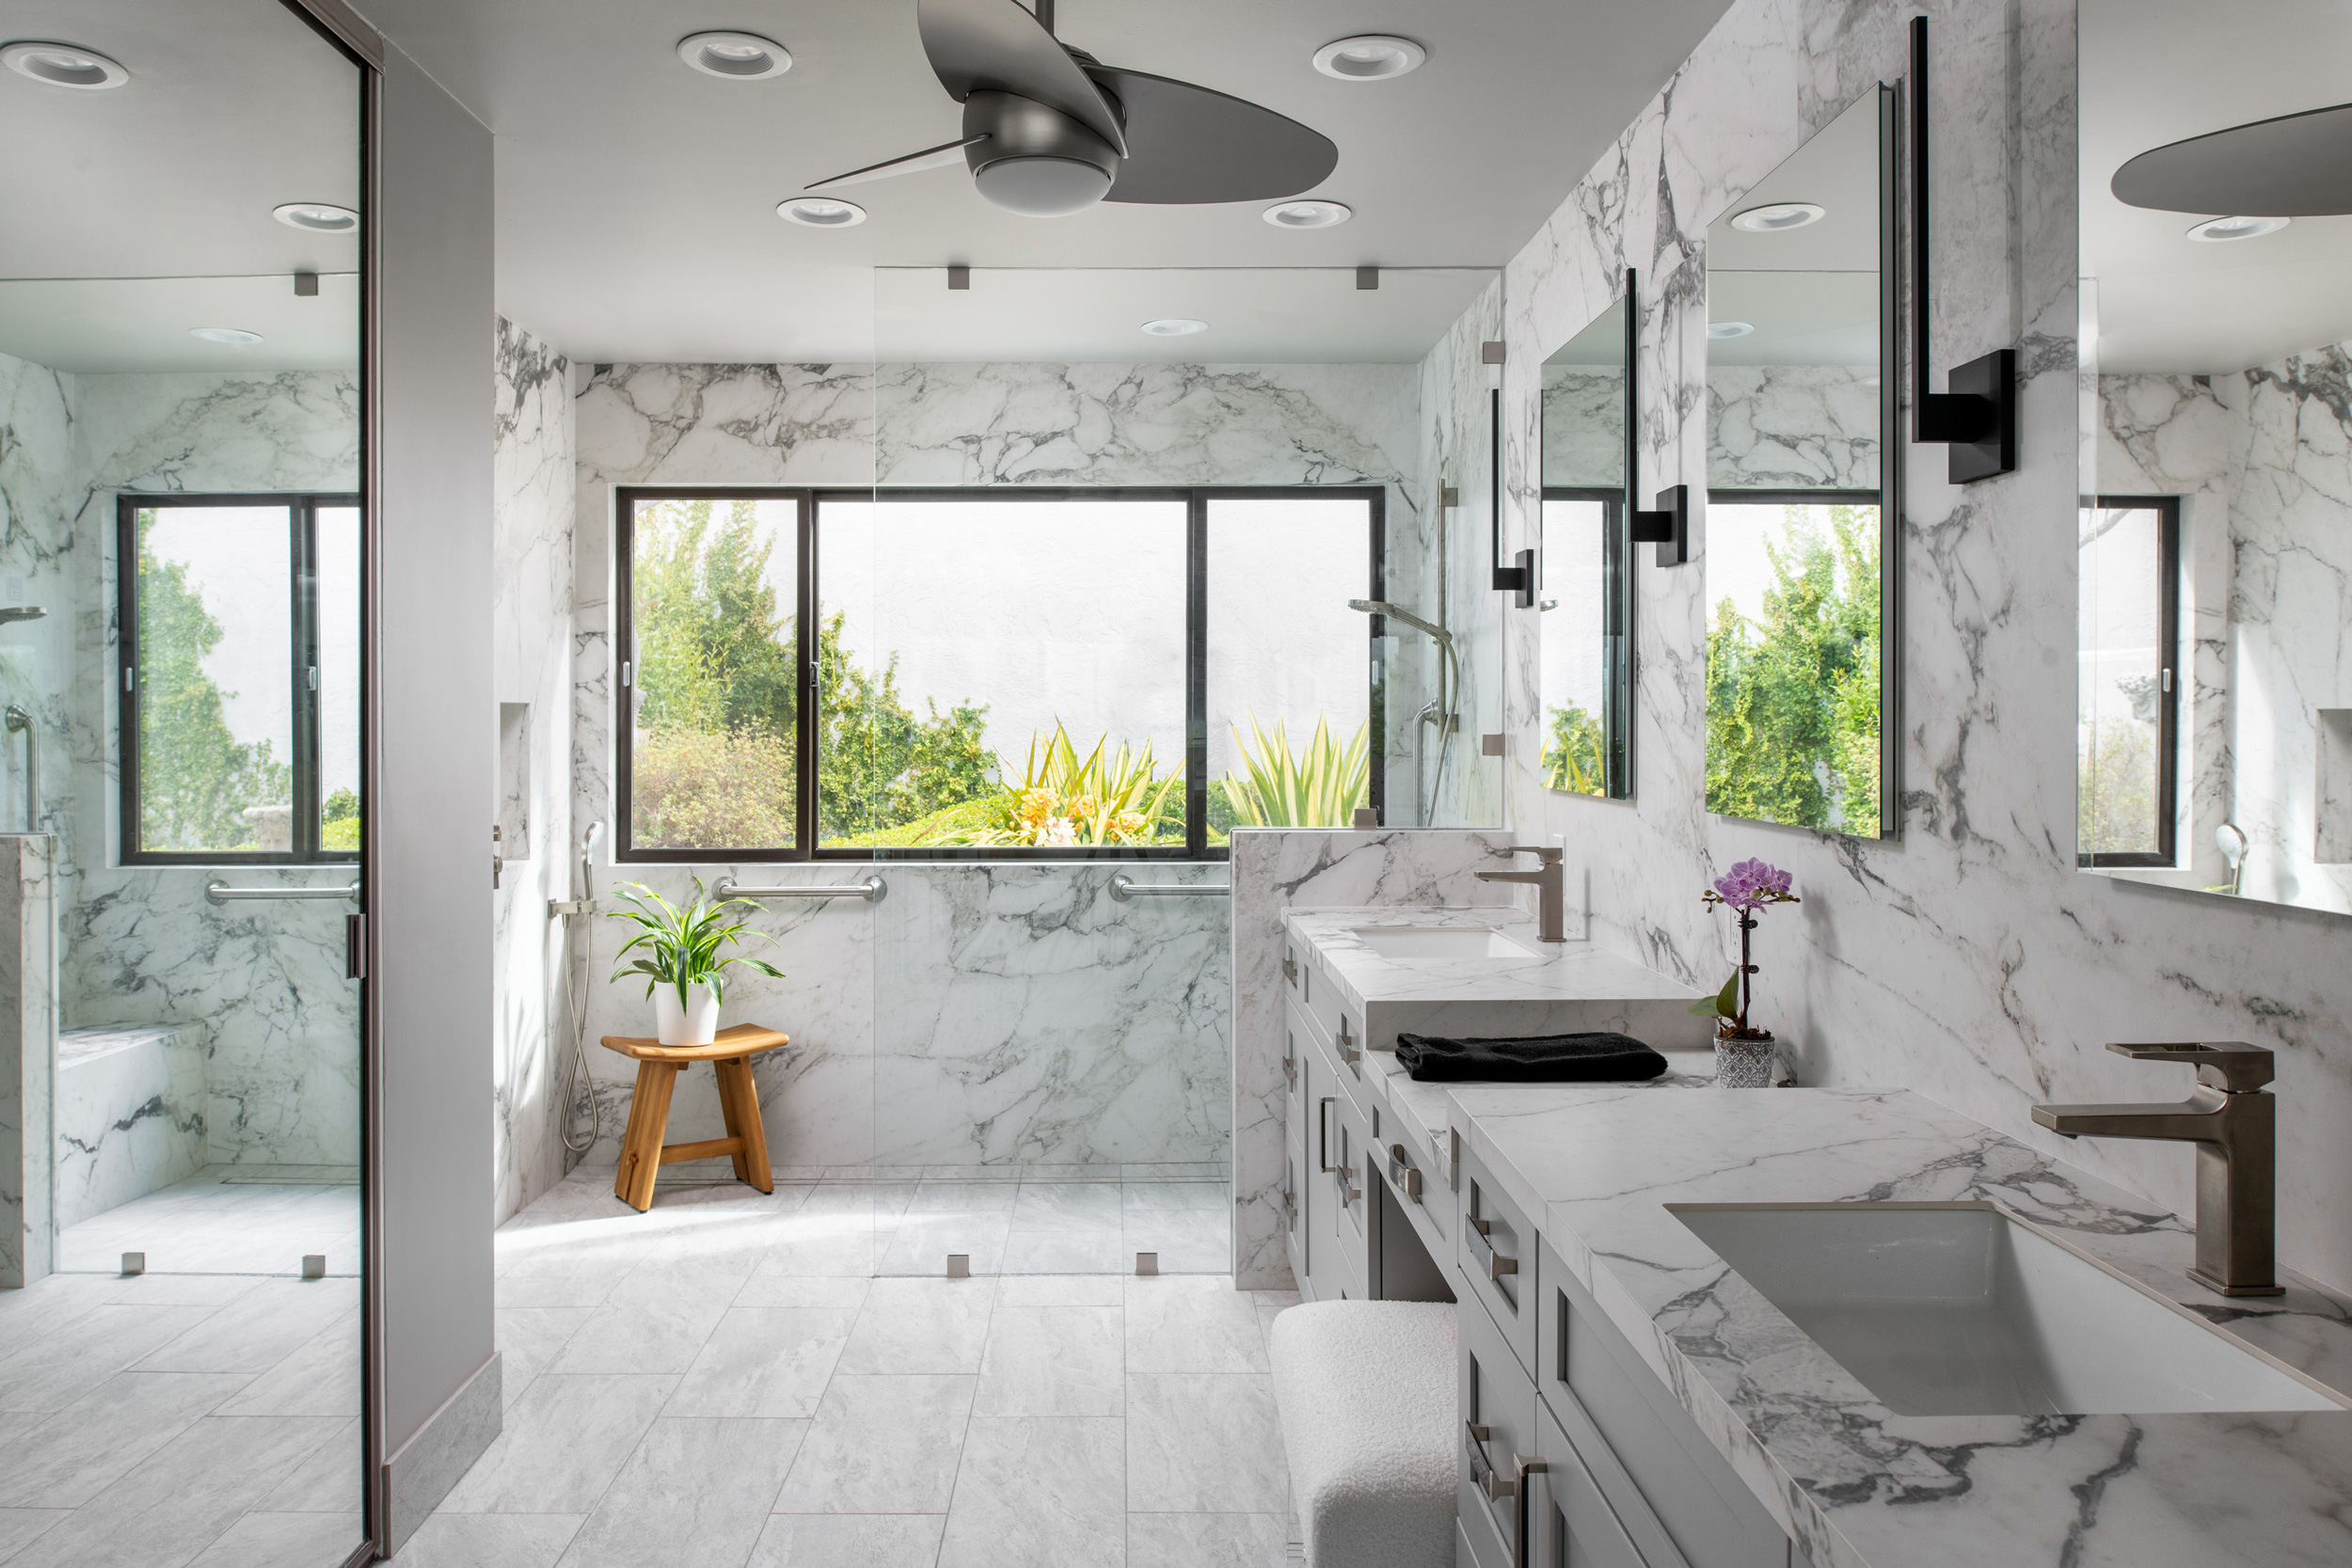 Large-format Porcelain Sintered Stone Shower Wall Cladding and Bathroom Vanity in Calacatta Gypsum